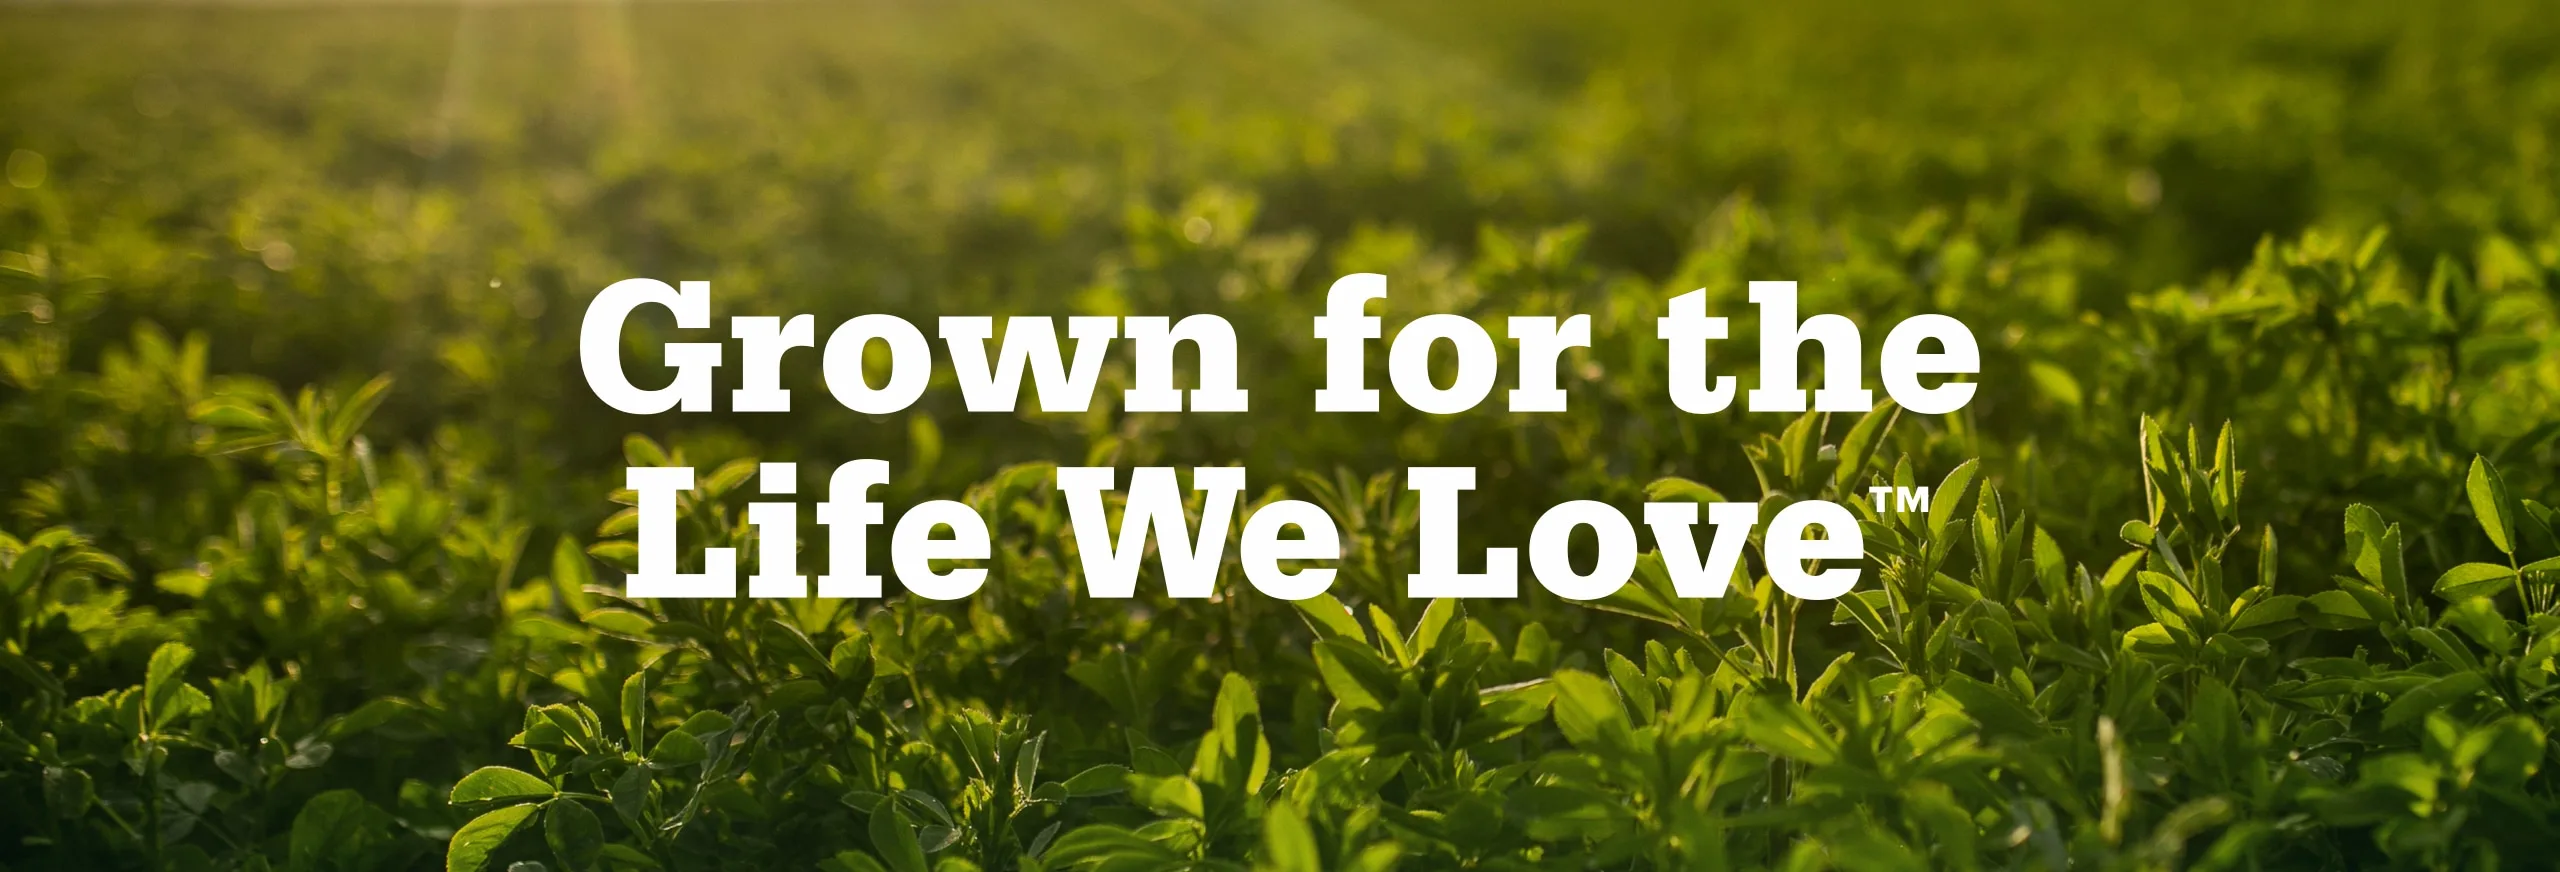 Standlee grown for the life we love - marketing, tagline